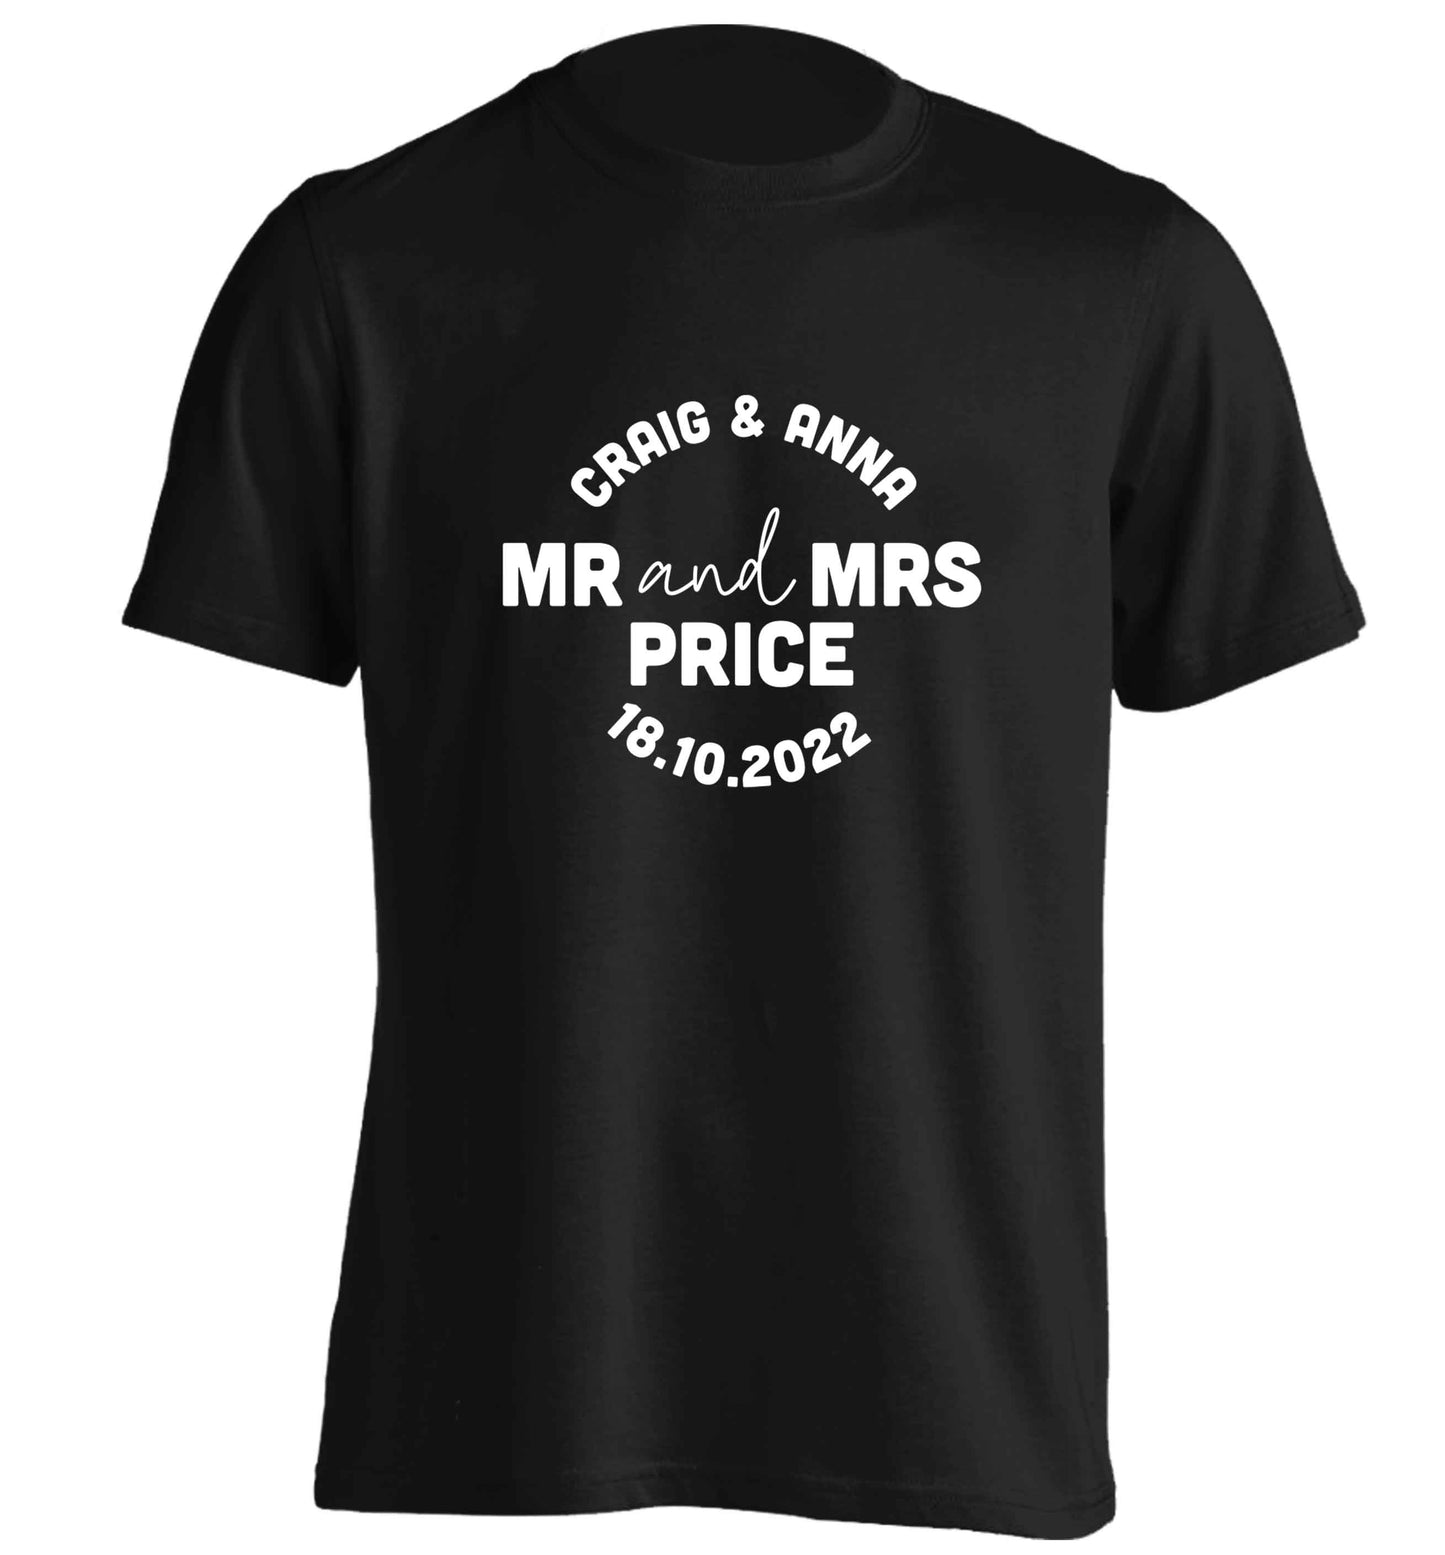 Personalised Mr and Mrs wedding and date! Ideal wedding favours! adults unisex black Tshirt 2XL